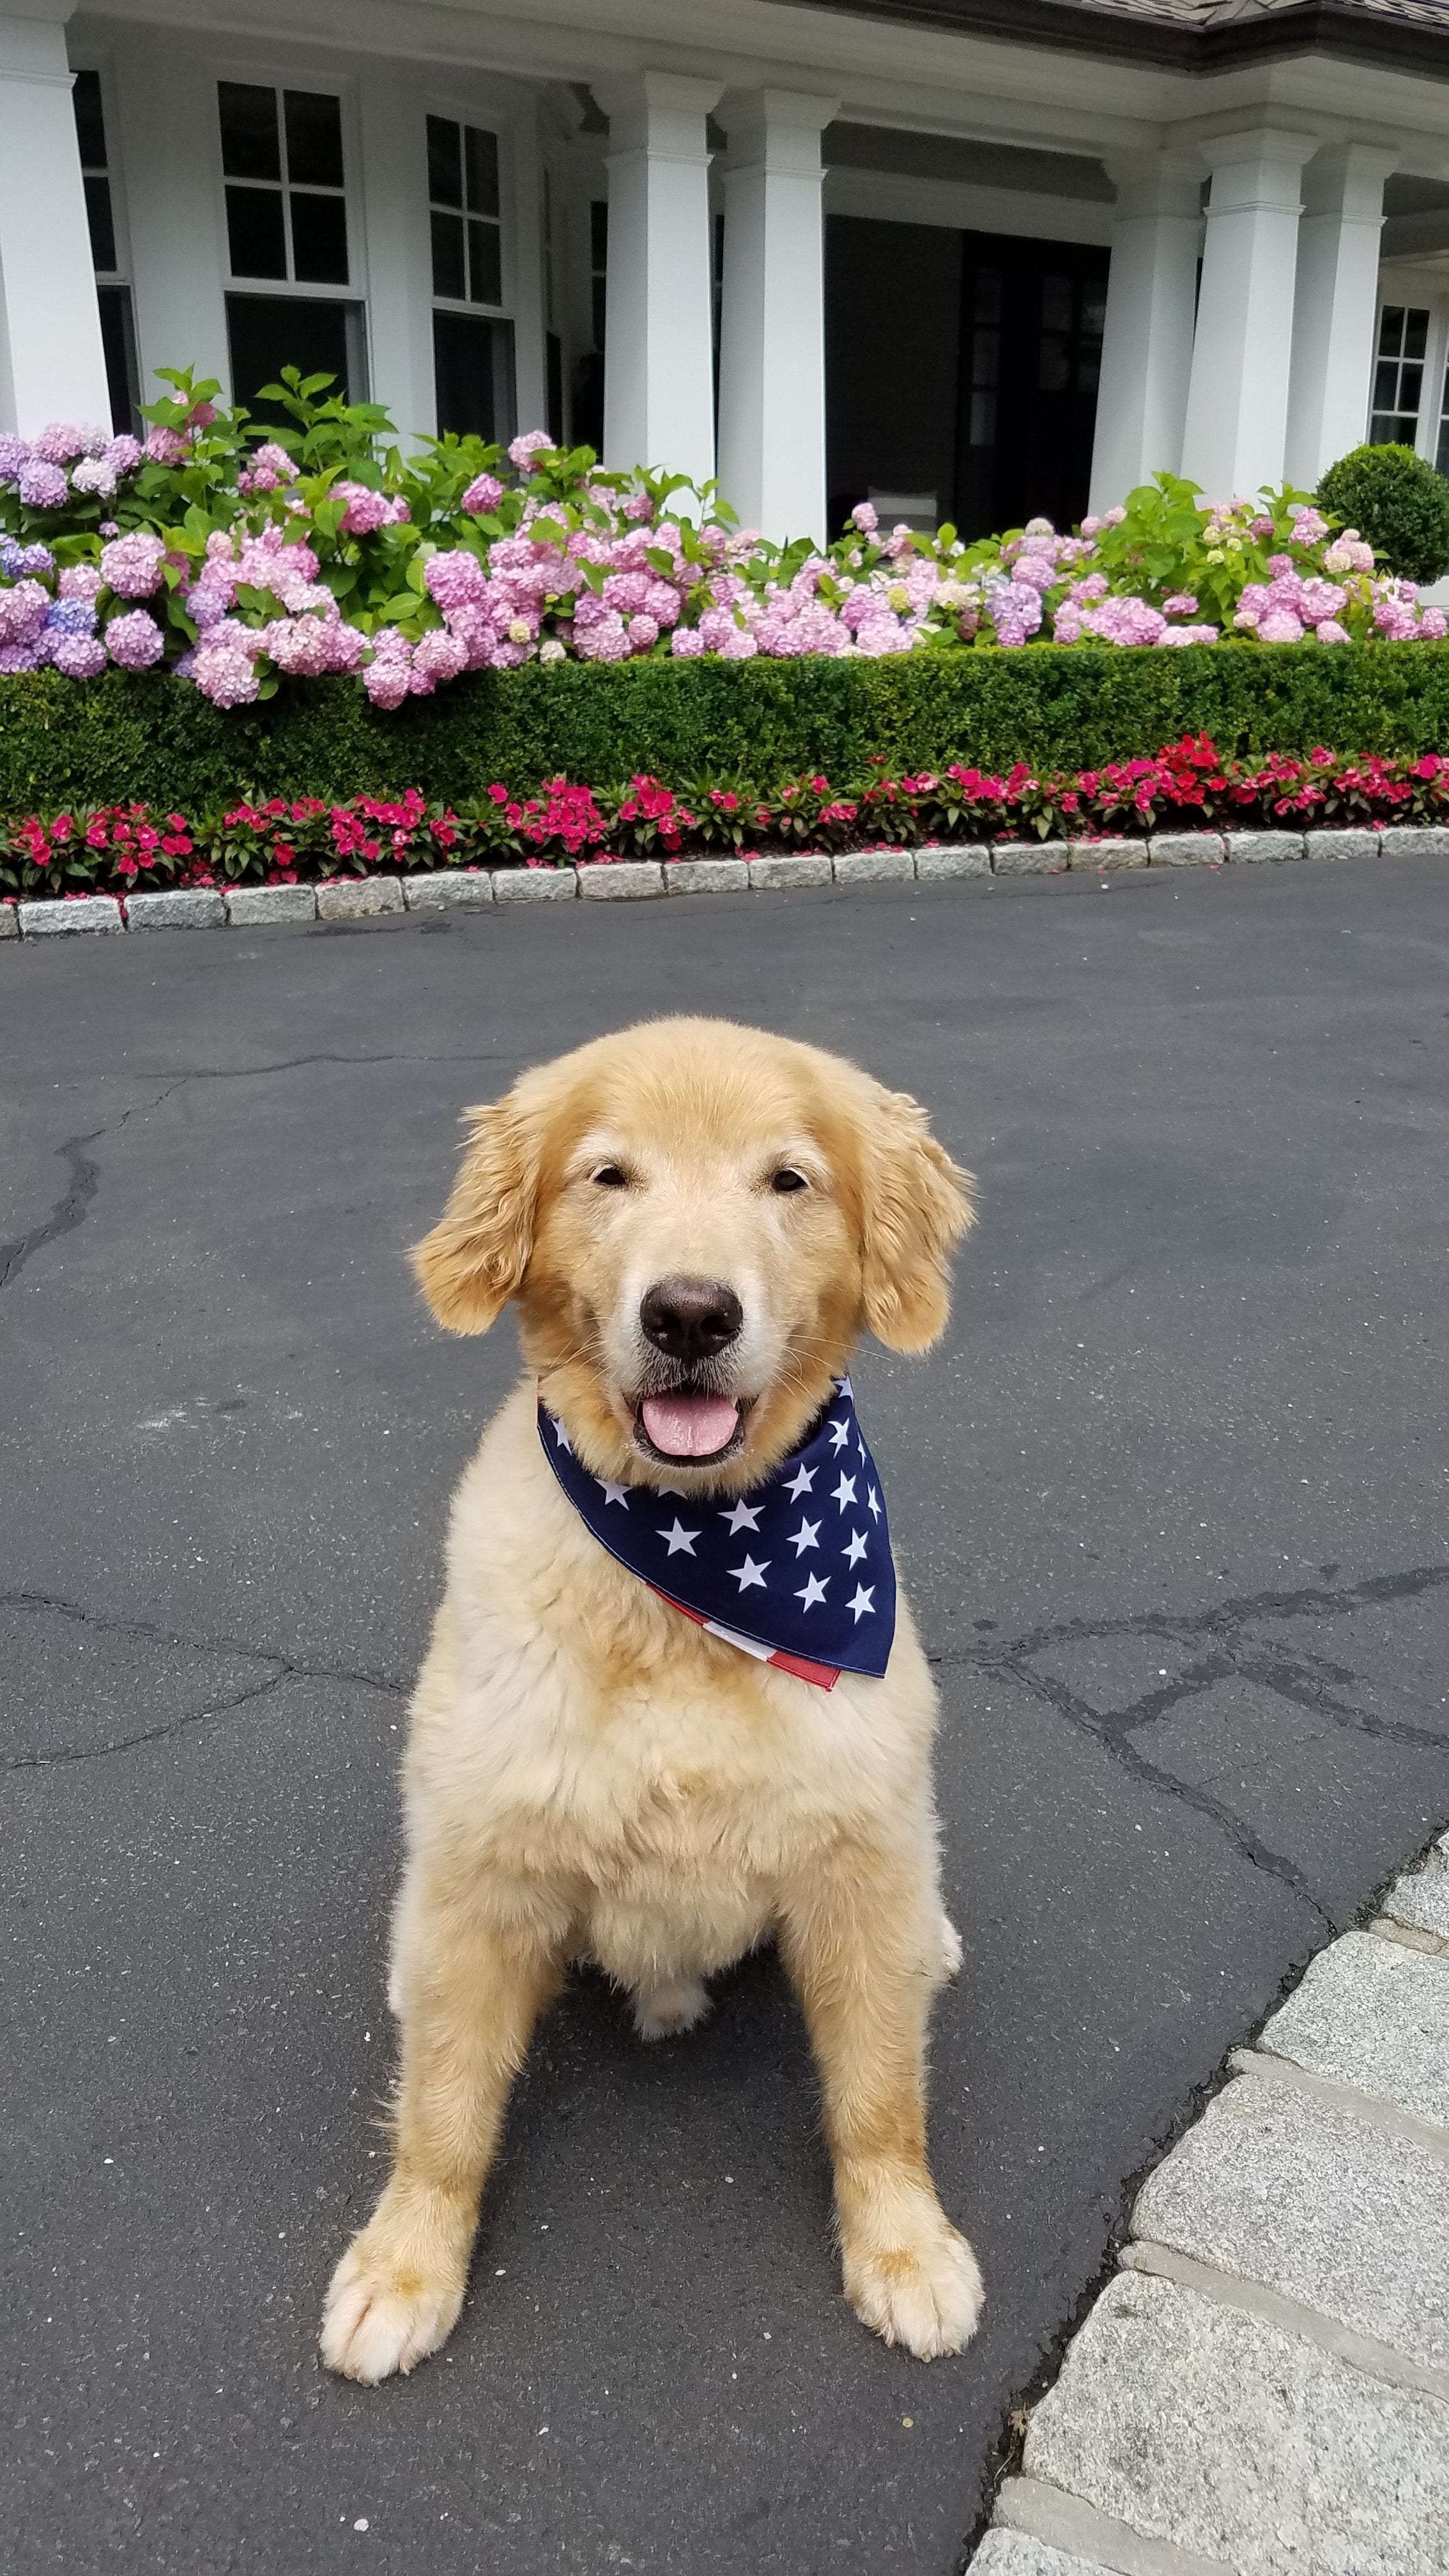 4th of July and K9 Trek is celebrating with Dog Hikes